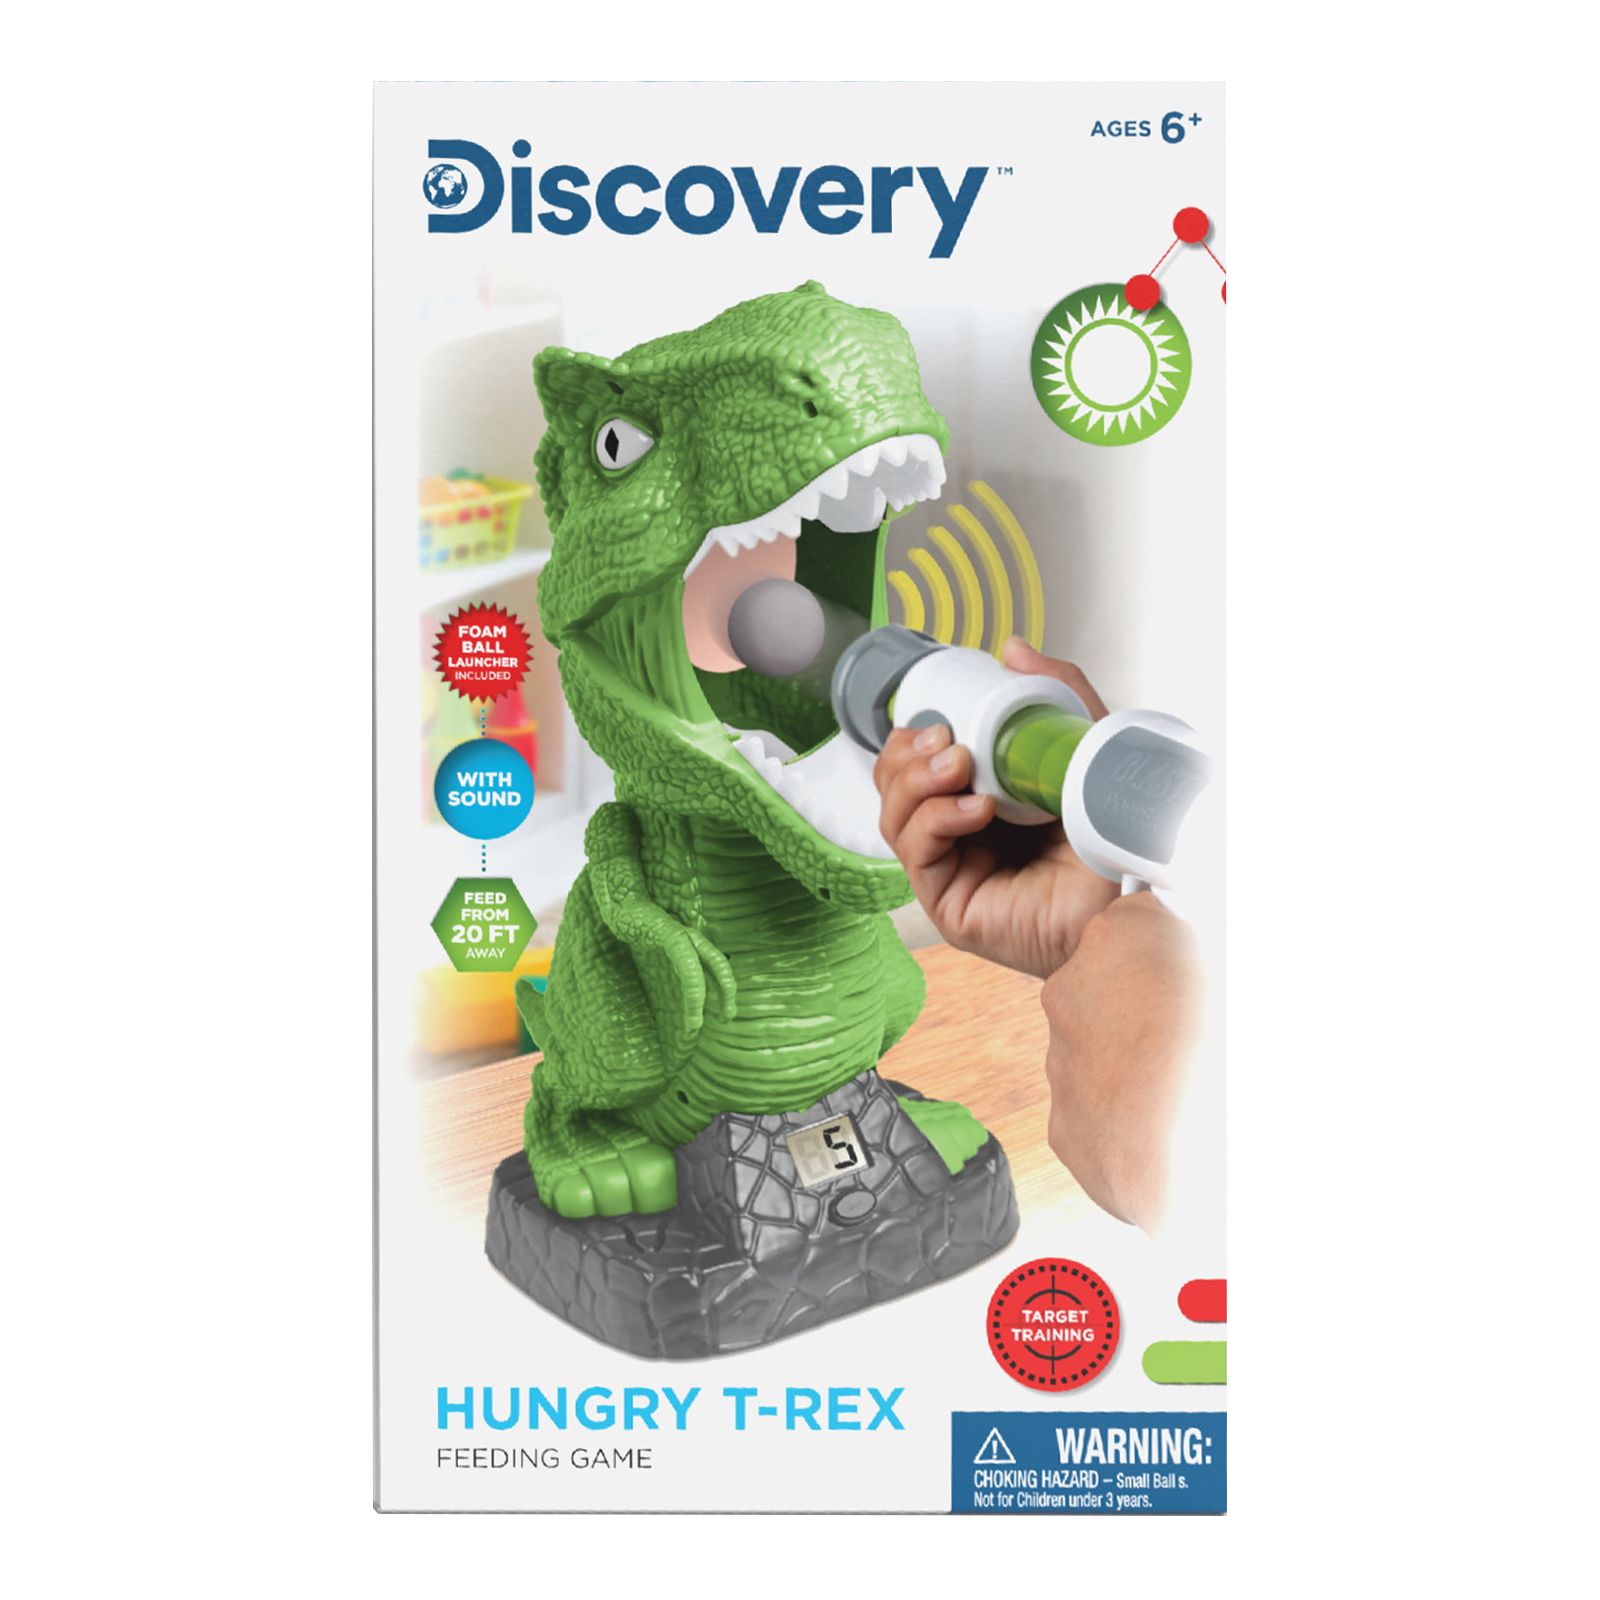 Smart Lab Toys - Tiny Baking! Play Cooking Toy, Create Tiny Foods